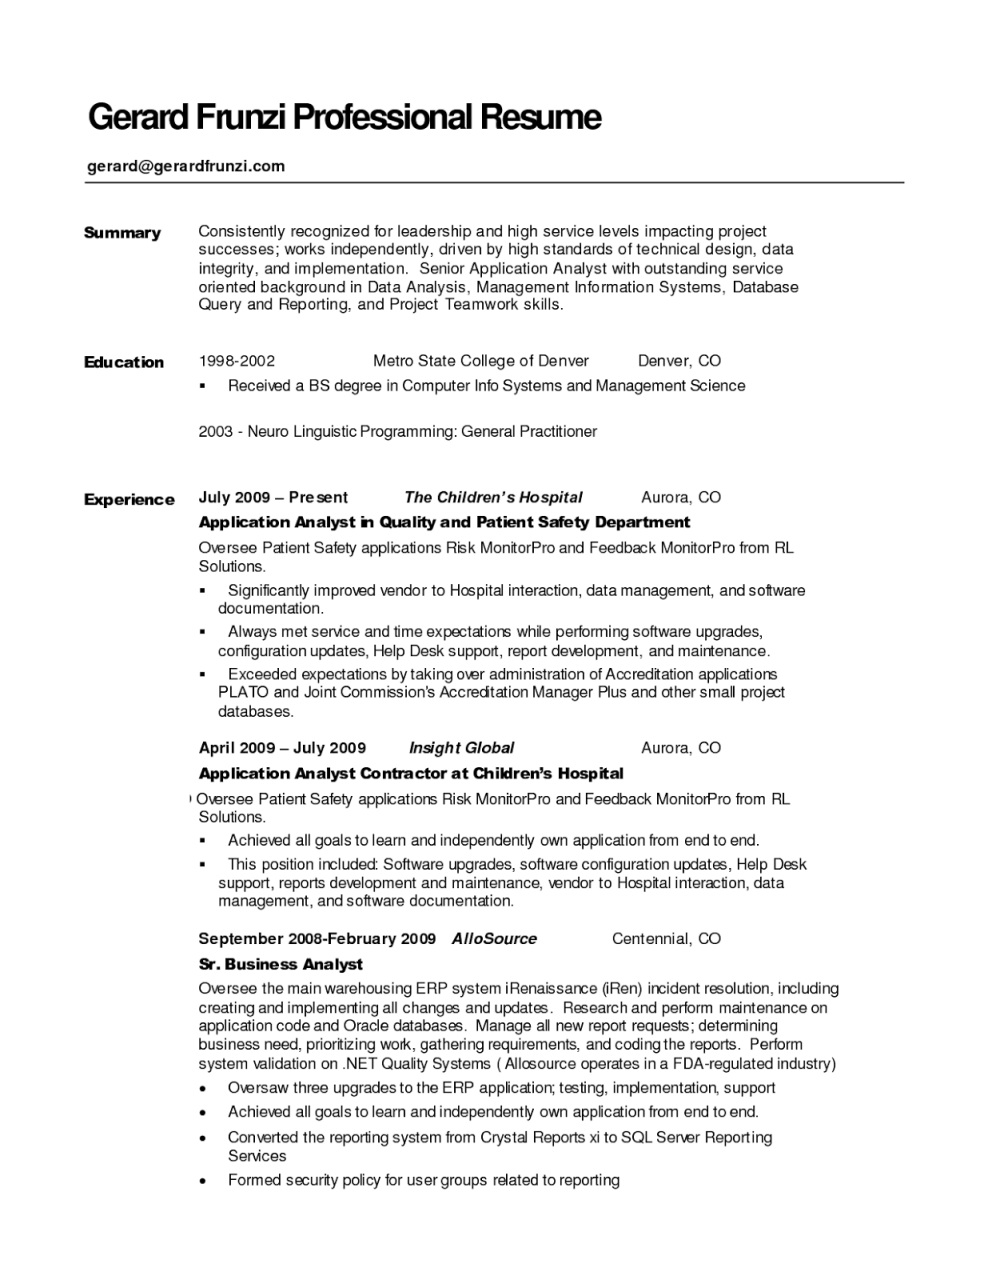 How To Write The Summary On A Resume